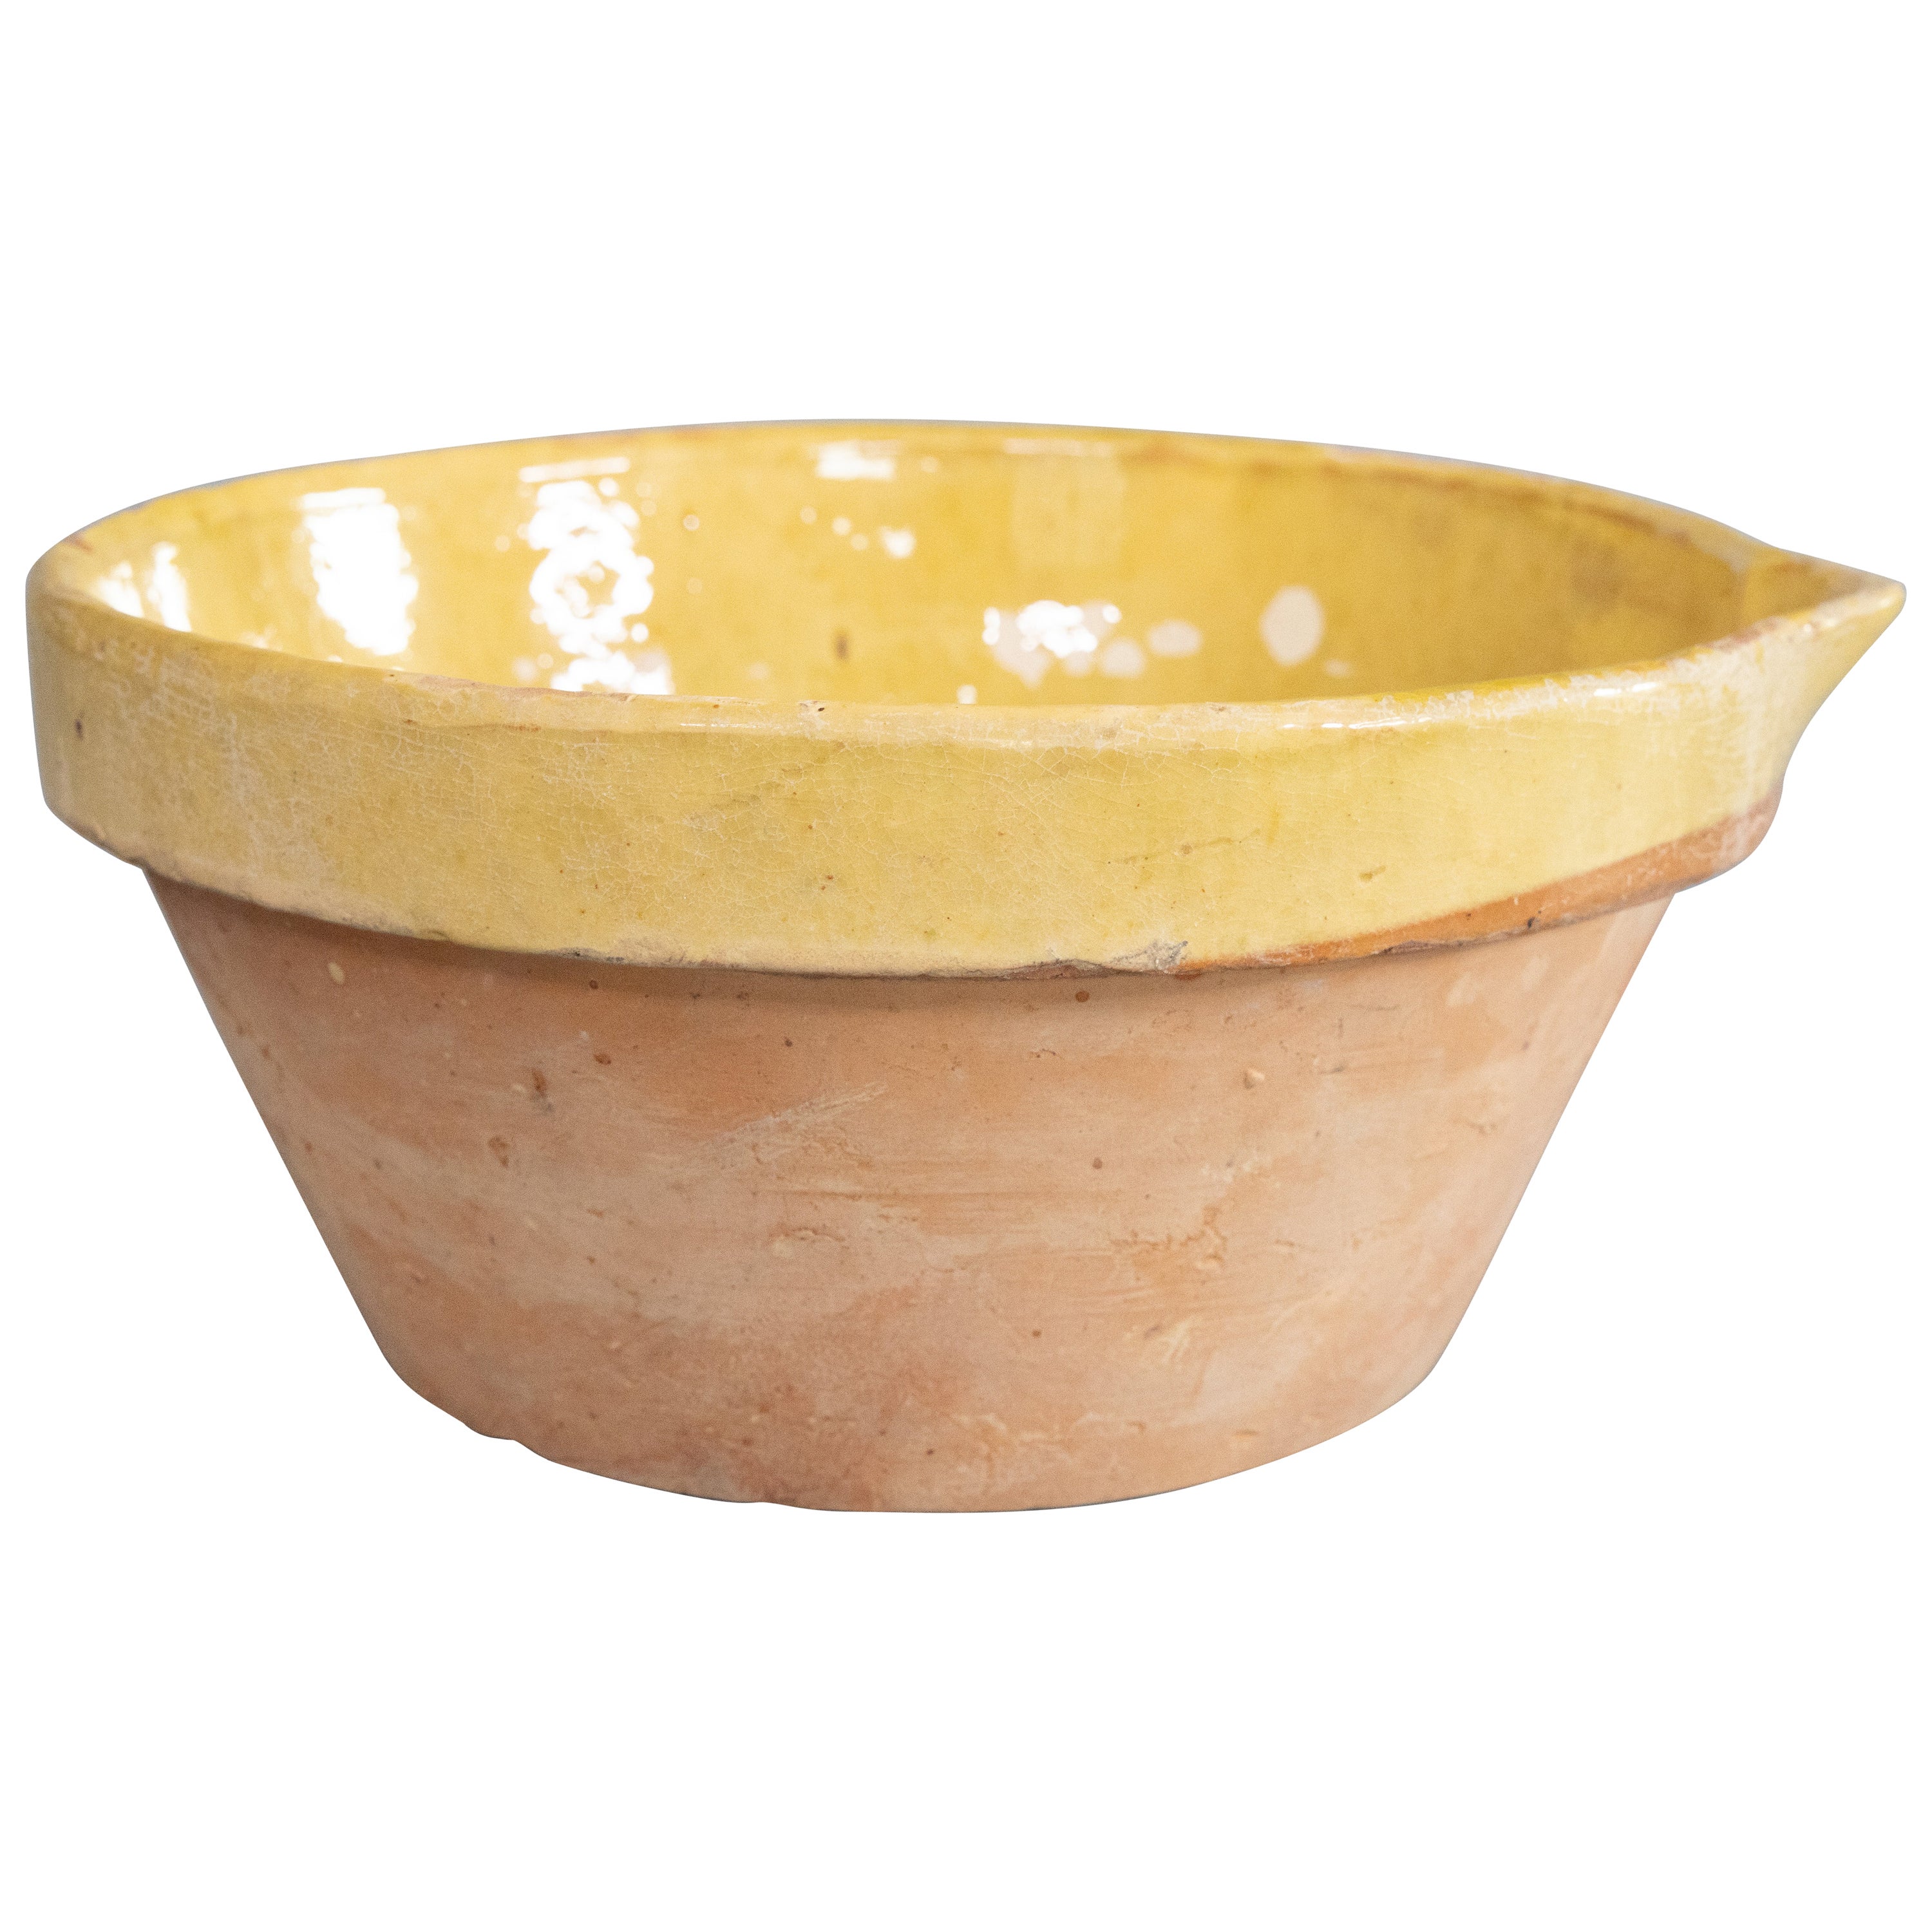 Antique French Provincial Yellow Glazed Terracotta Tian Dairy Bowl, circa 1900